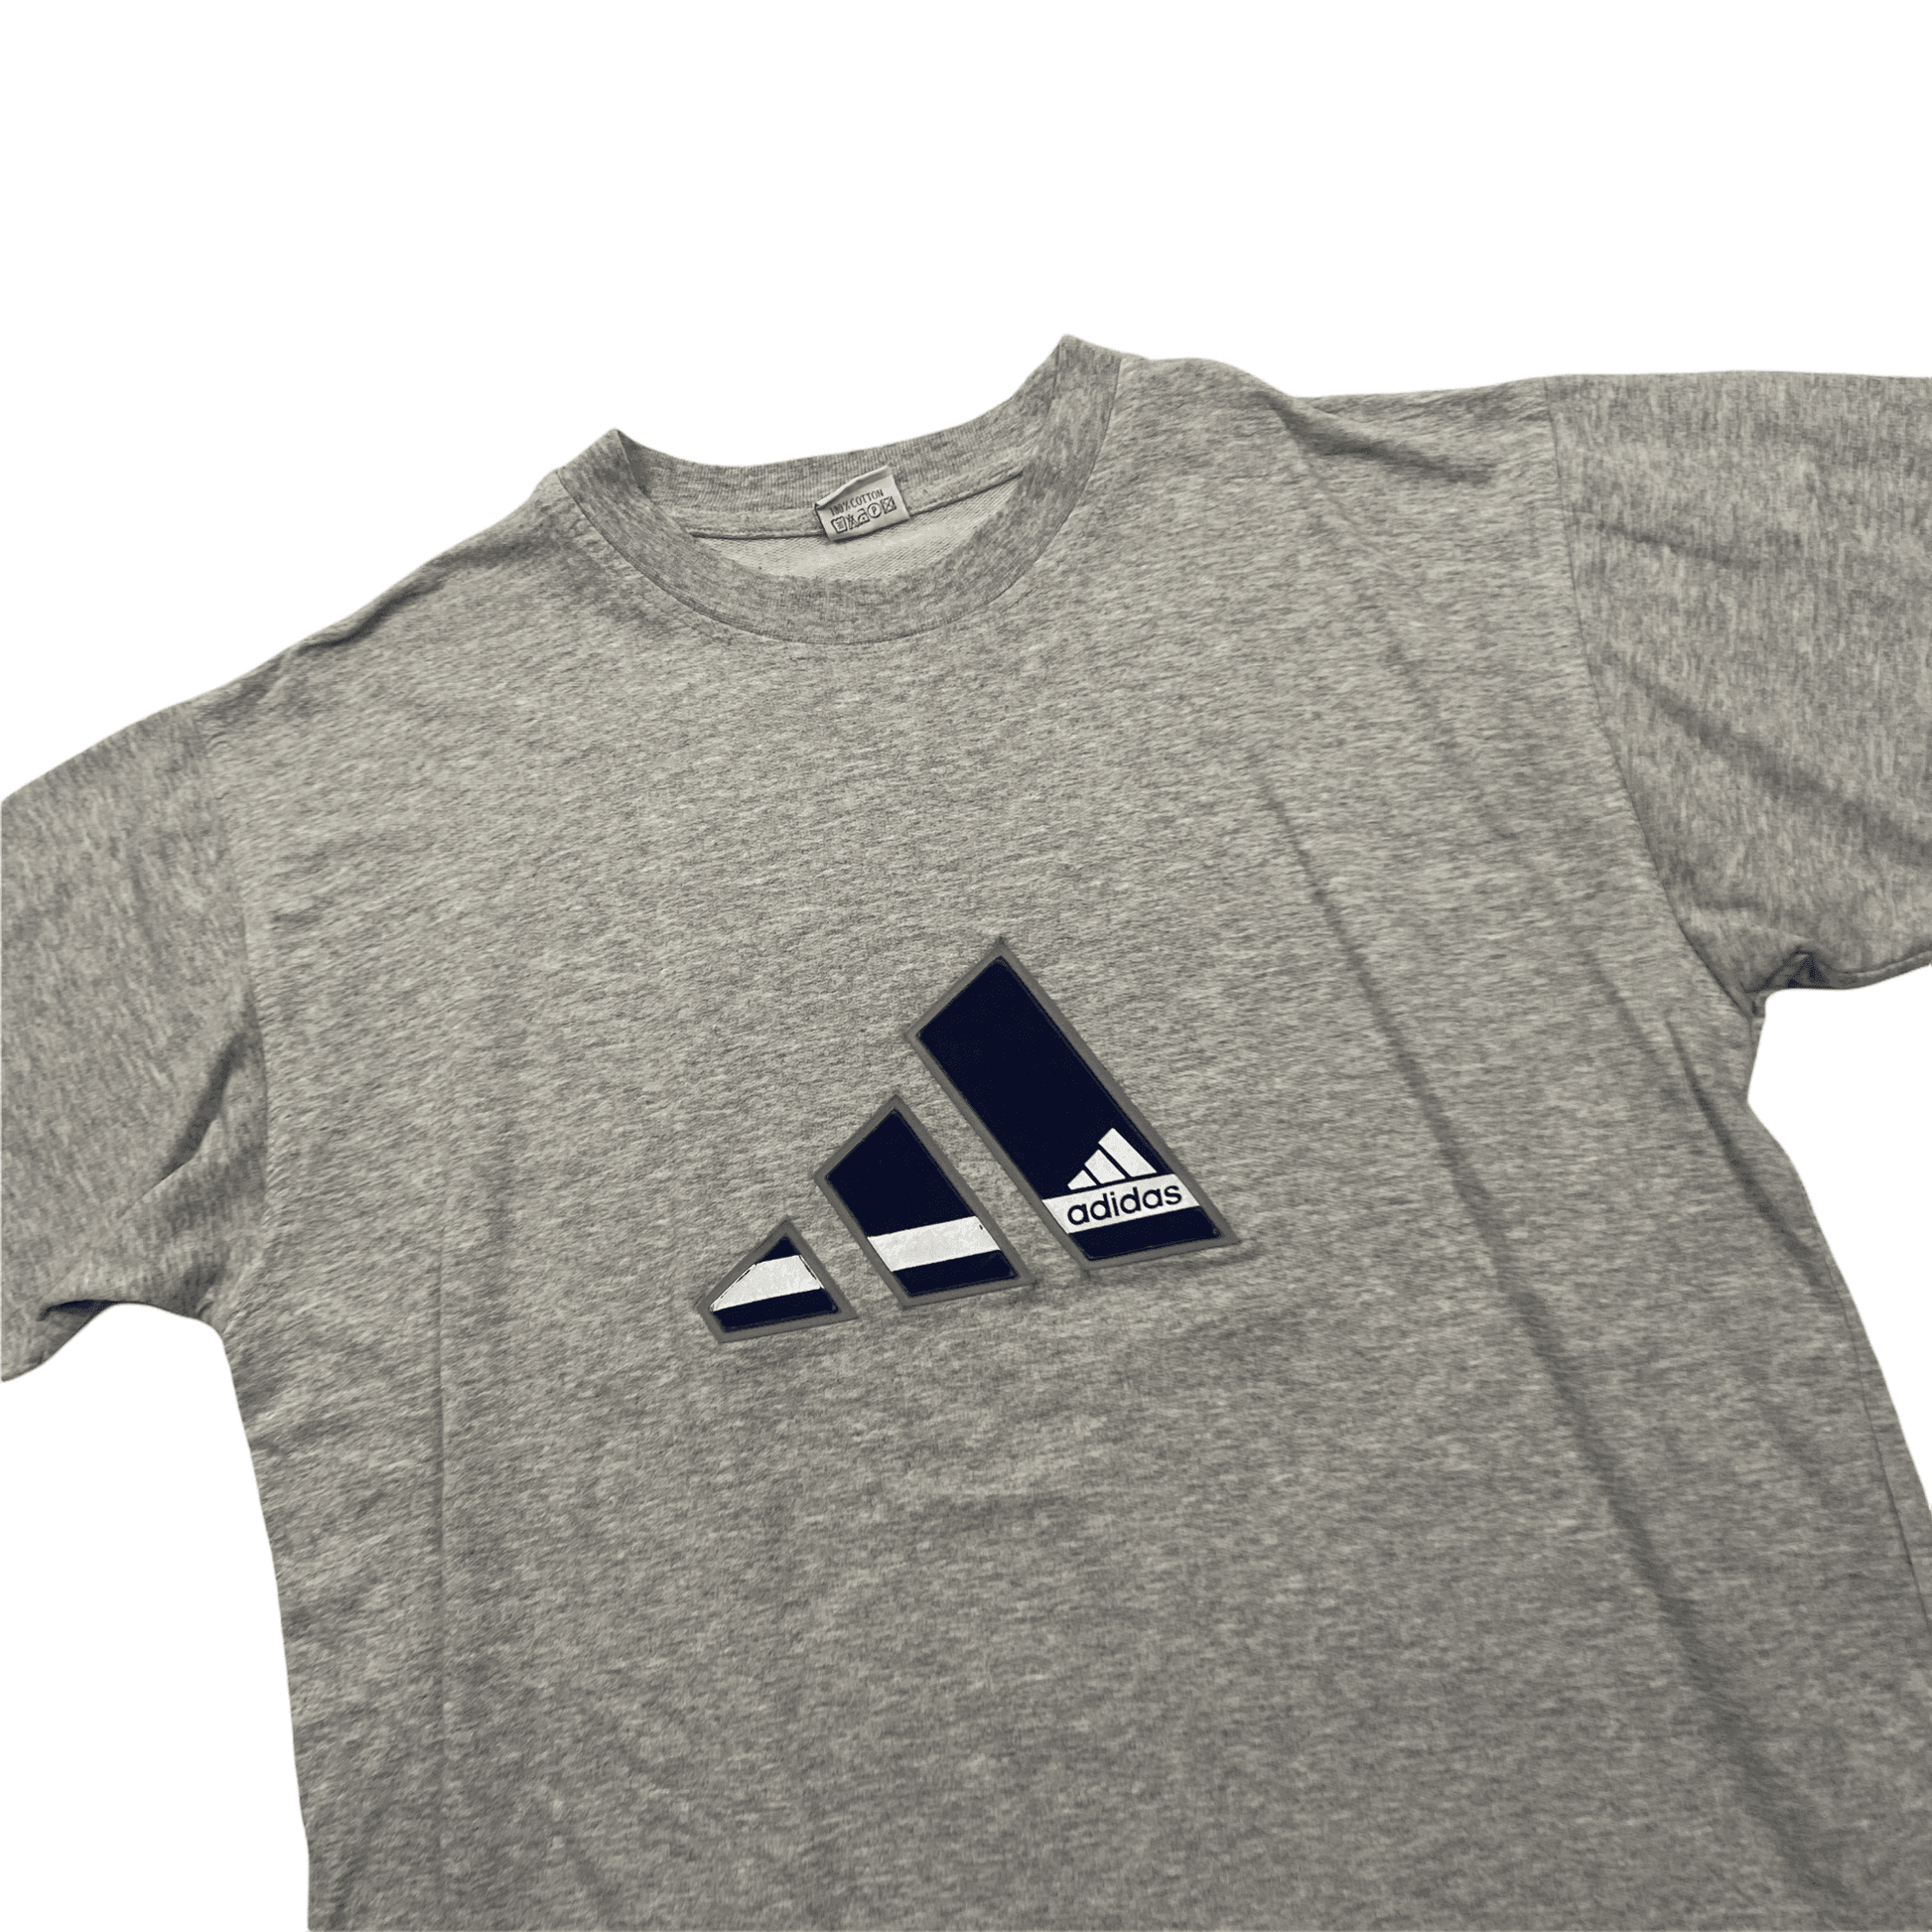 Vintage 80s Grey Adidas Spell-Out Tee - Extra Large (Recommended Size - Large) - The Streetwear Studio